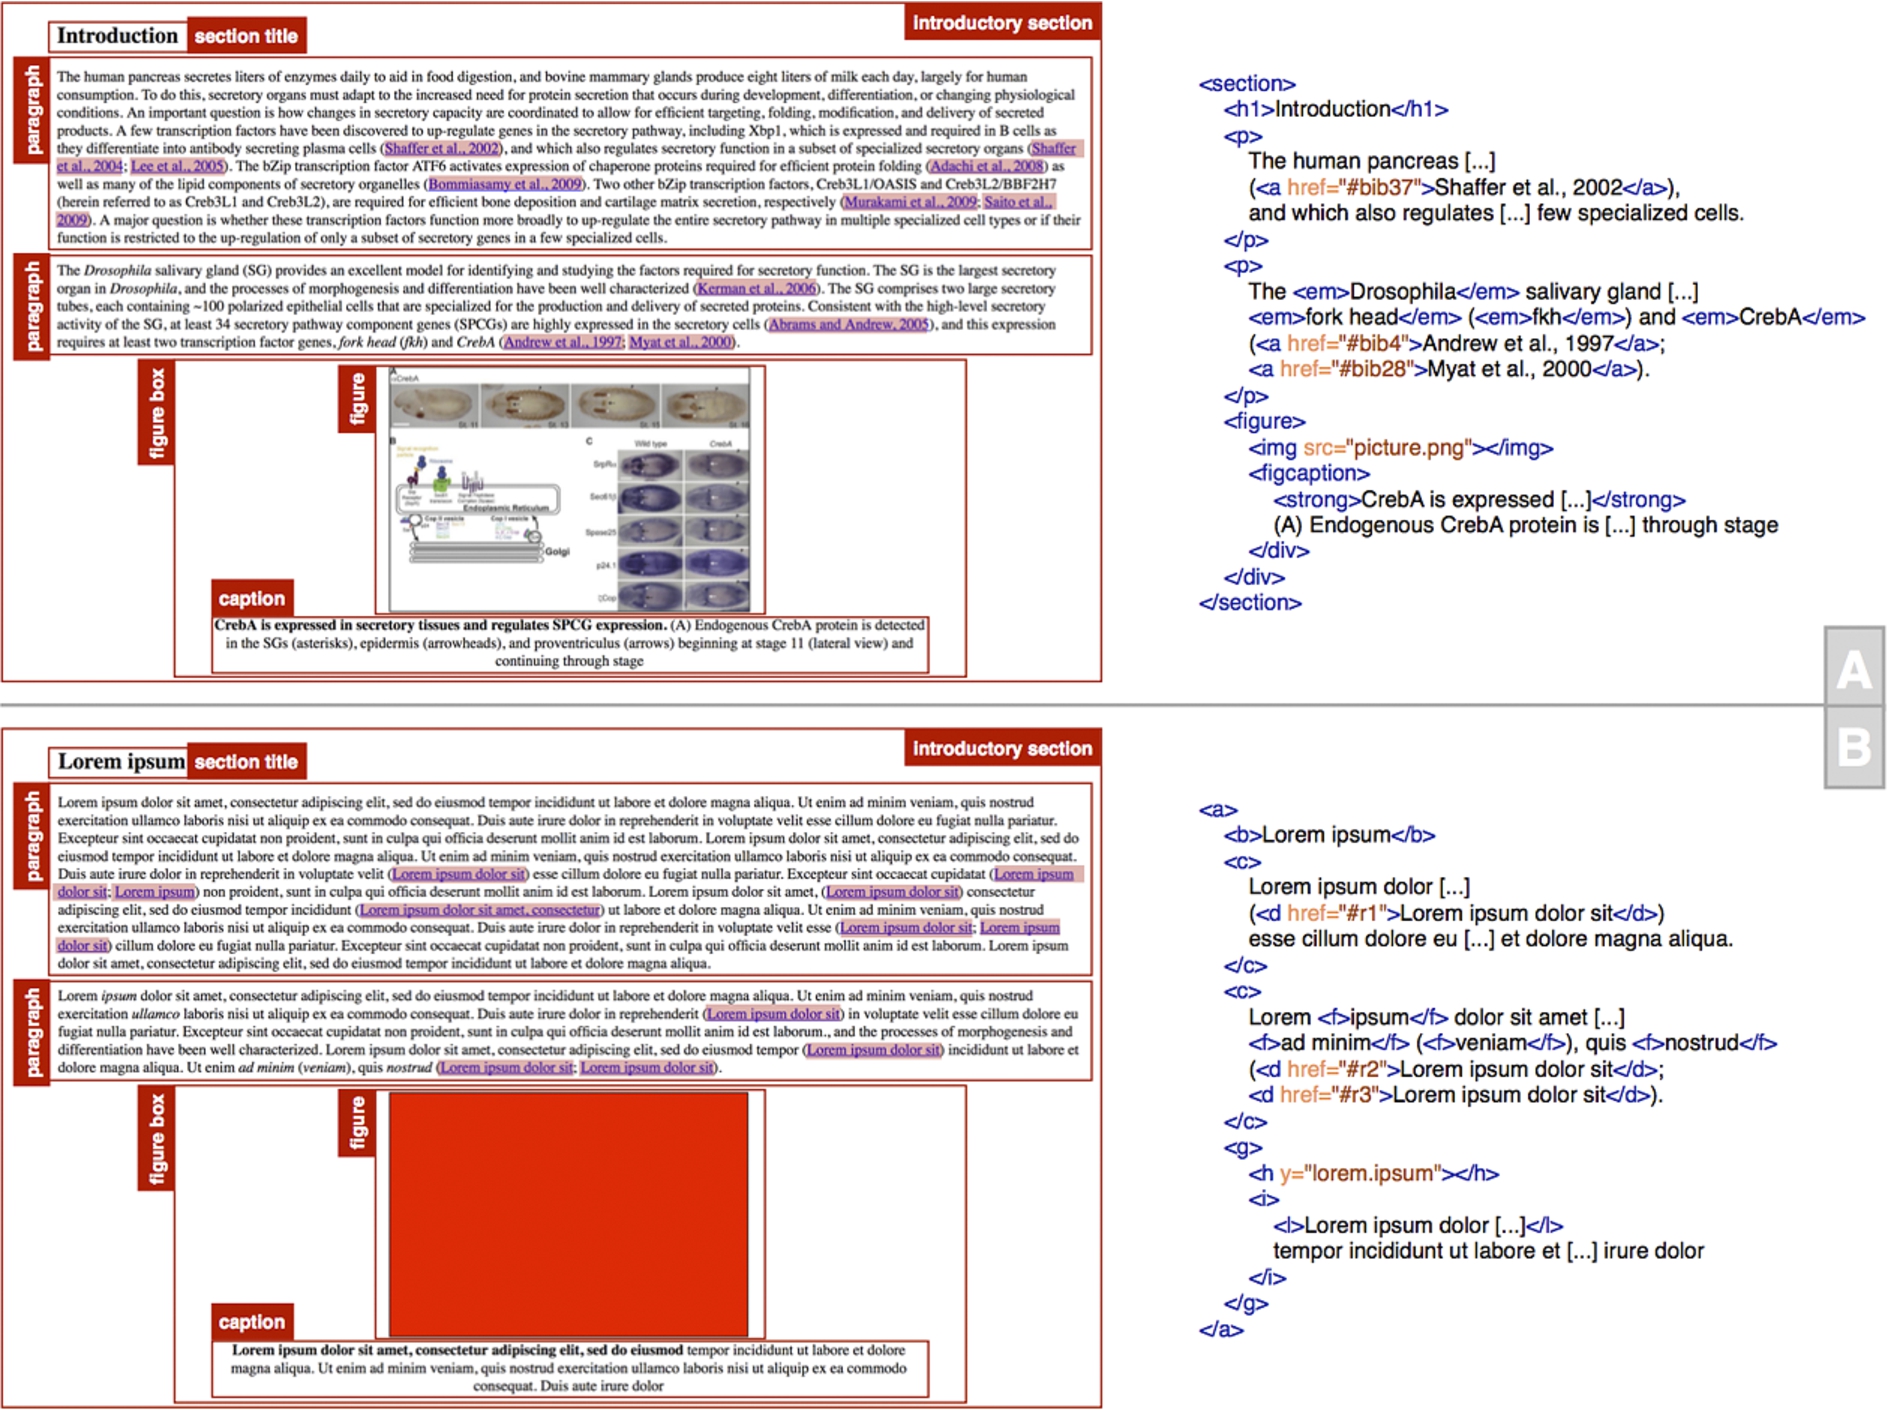 The partial HTML version of a portion of the article entitled “The CrebA/Creb3-like transcription factors are major and direct regulators of secretory capacity” [14] [top panel (A)], and the same containment structure [bottom panel (B)] stored according to a fictional XML-based language, where no meaningful textual or visual content is explicit. The empty boxes with a red border, the blue-underlined strings, as well as the italic and strong strings, describe the various parts of the article. The pink rectangles delimit in-text reference pointers to some bibliographic references, while the meaning of the other parts is defined by means of the red labels with white text.